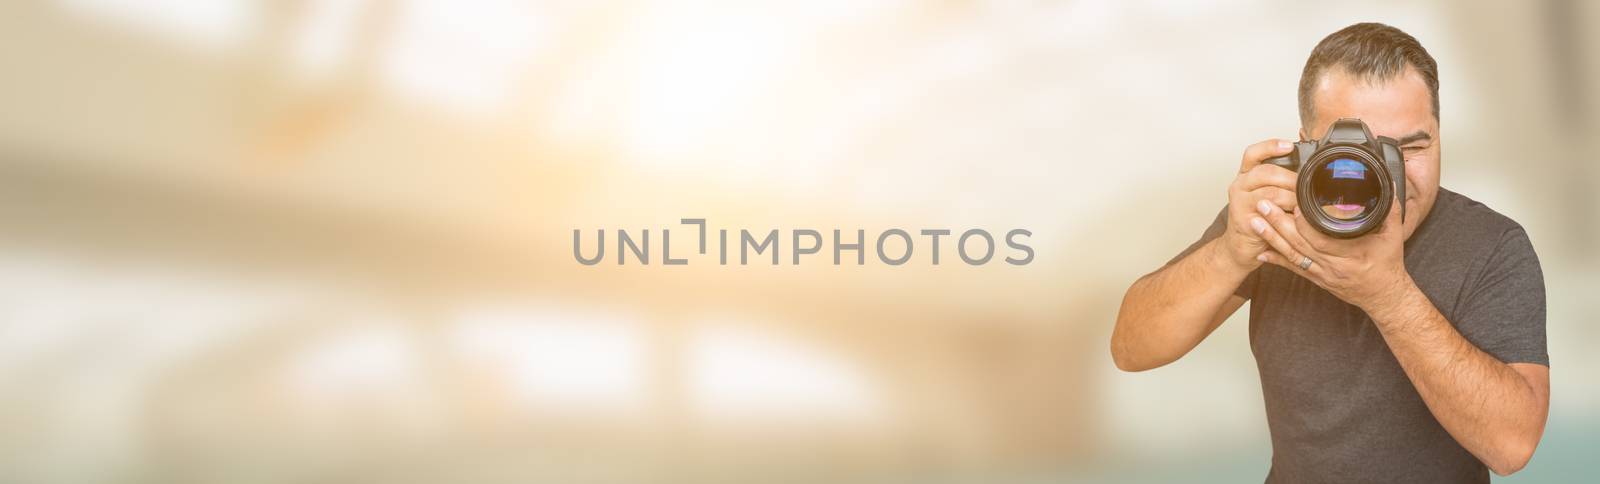 Hispanic Man with DSLR Camera Wide Banner with Room For Copy. by Feverpitched